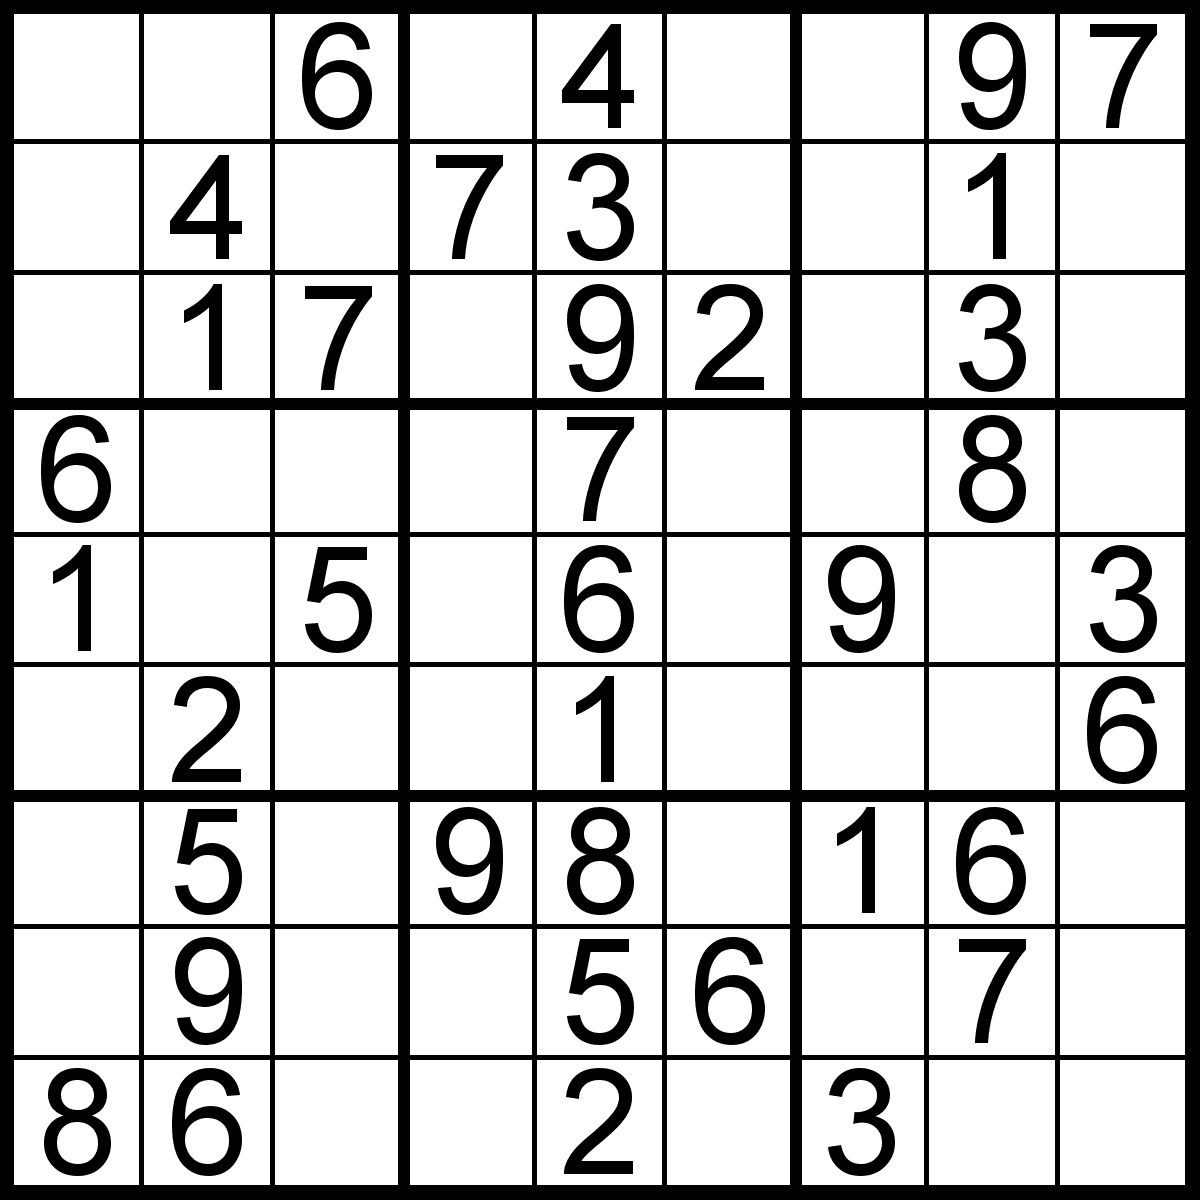 Easy Sudoku Puzzles Printable (96+ Images In Collection) Page 1 - Printable Sudoku Puzzles 99